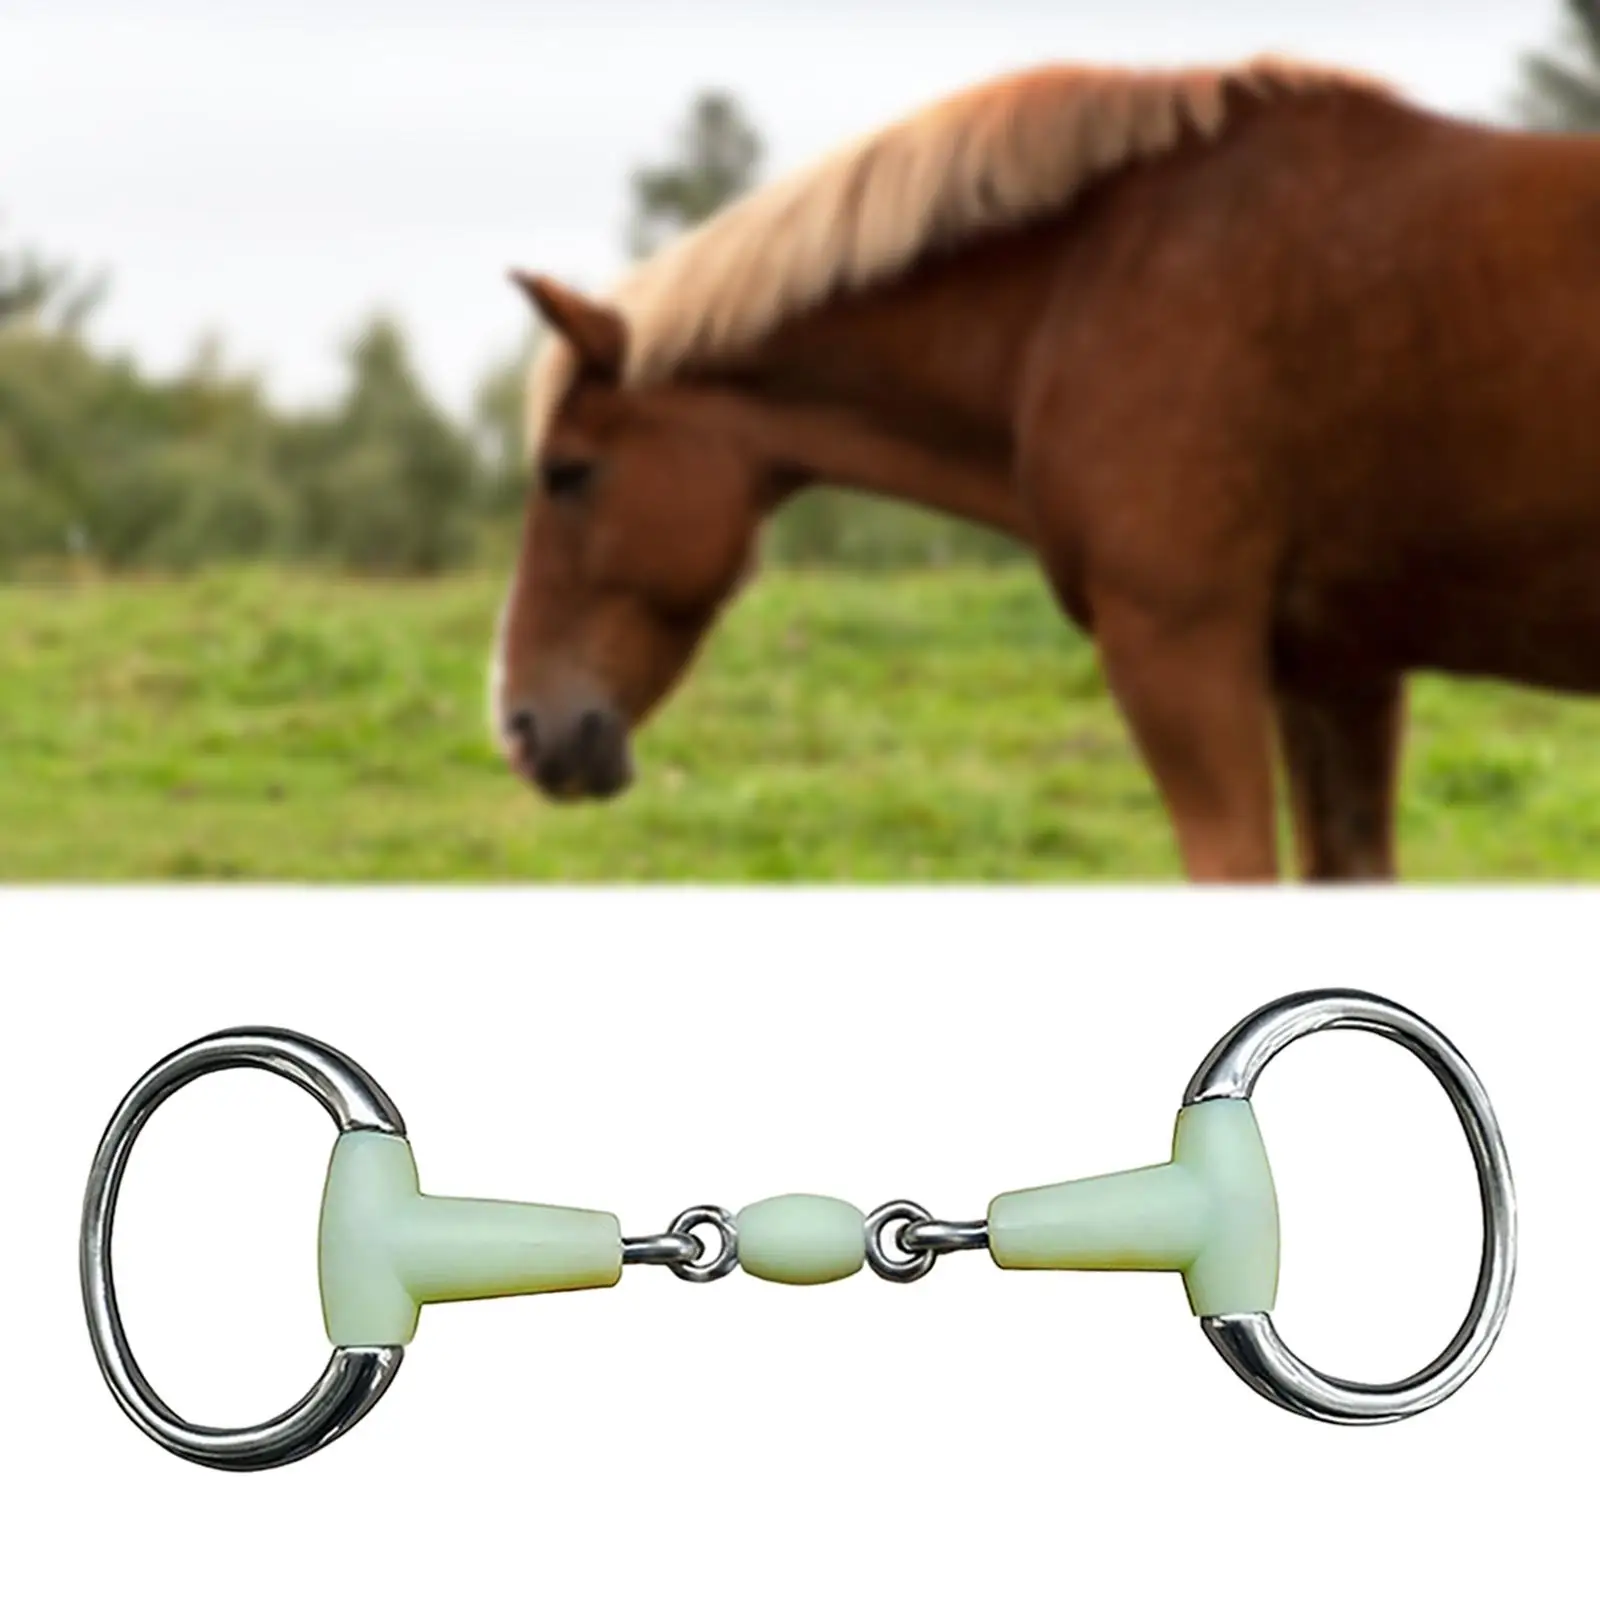 Horse Bit Mouth Horse Training Supplies for Draft Horses Mules